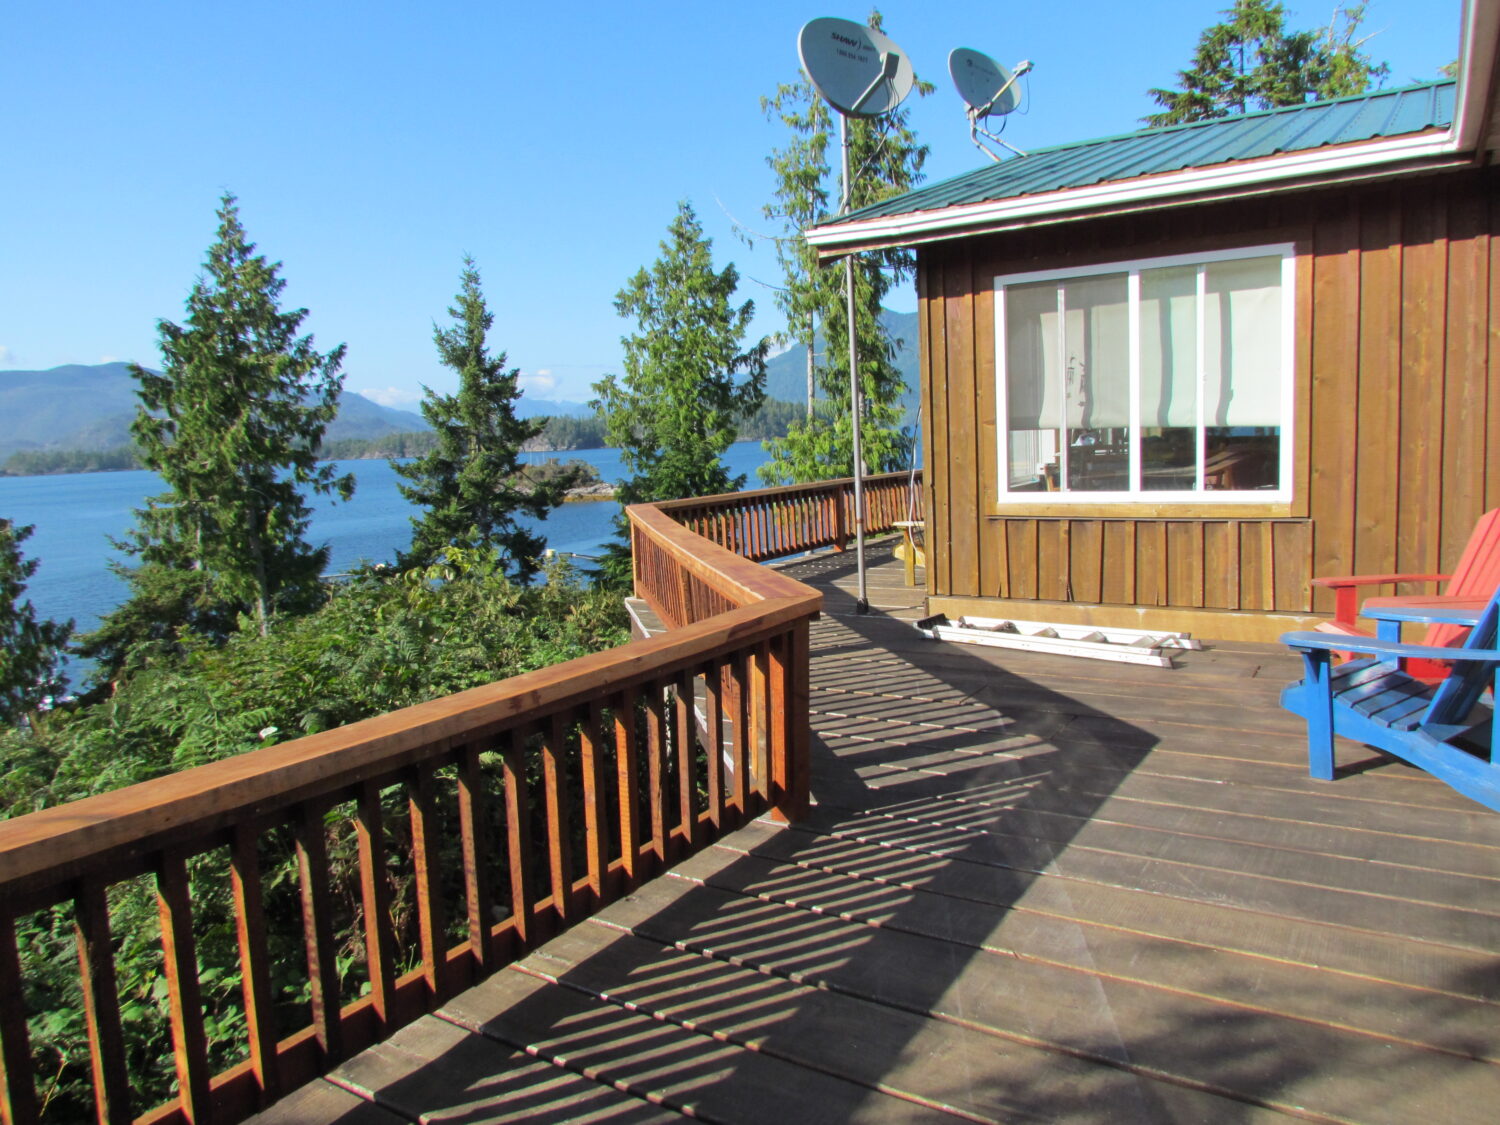 Deck and view